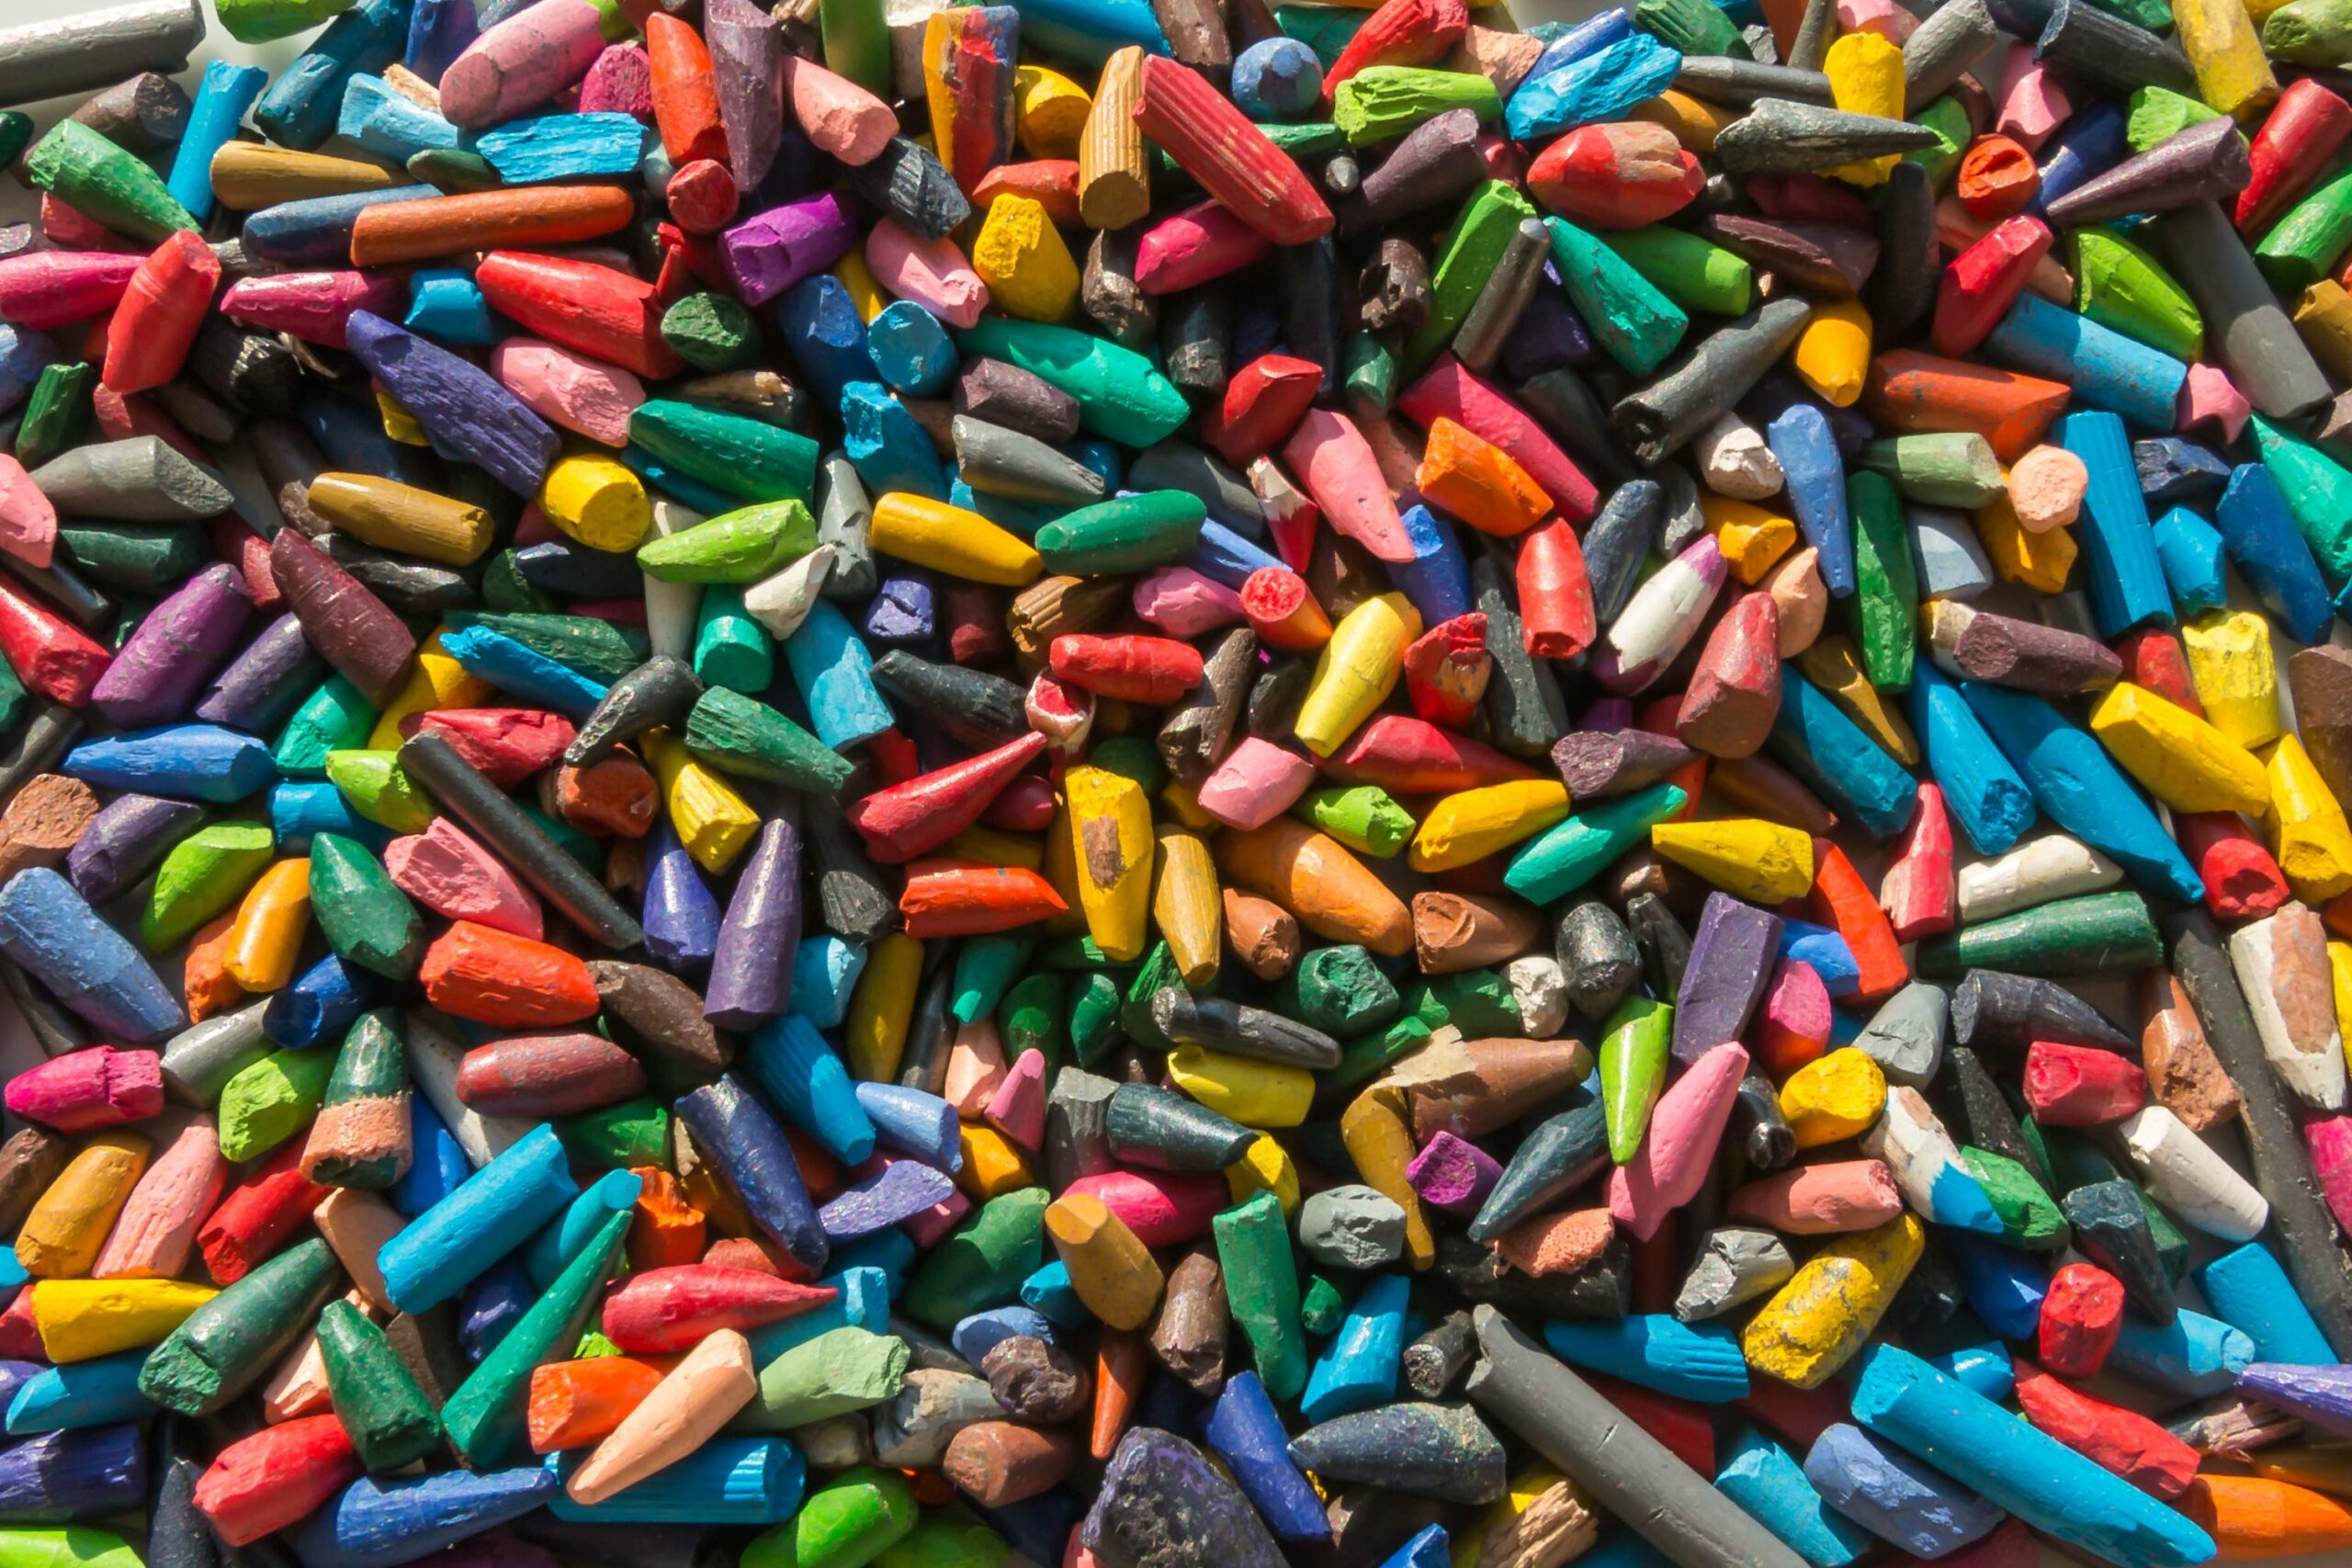 How to recycle shoes, crayons, toothbrushes, and other random stuff